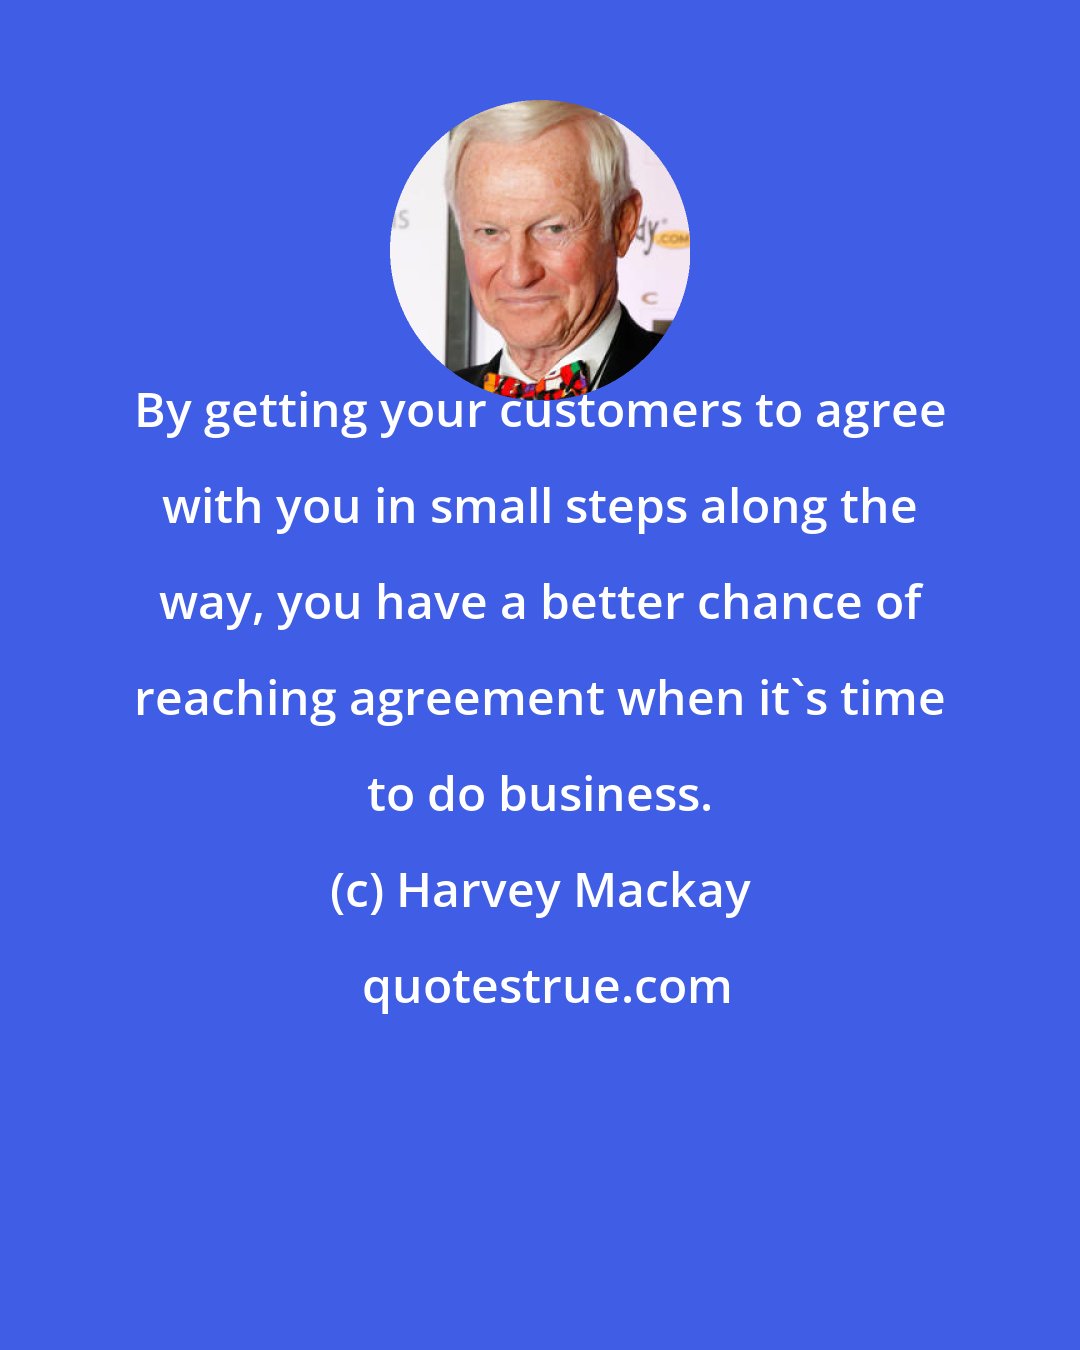 Harvey Mackay: By getting your customers to agree with you in small steps along the way, you have a better chance of reaching agreement when it's time to do business.